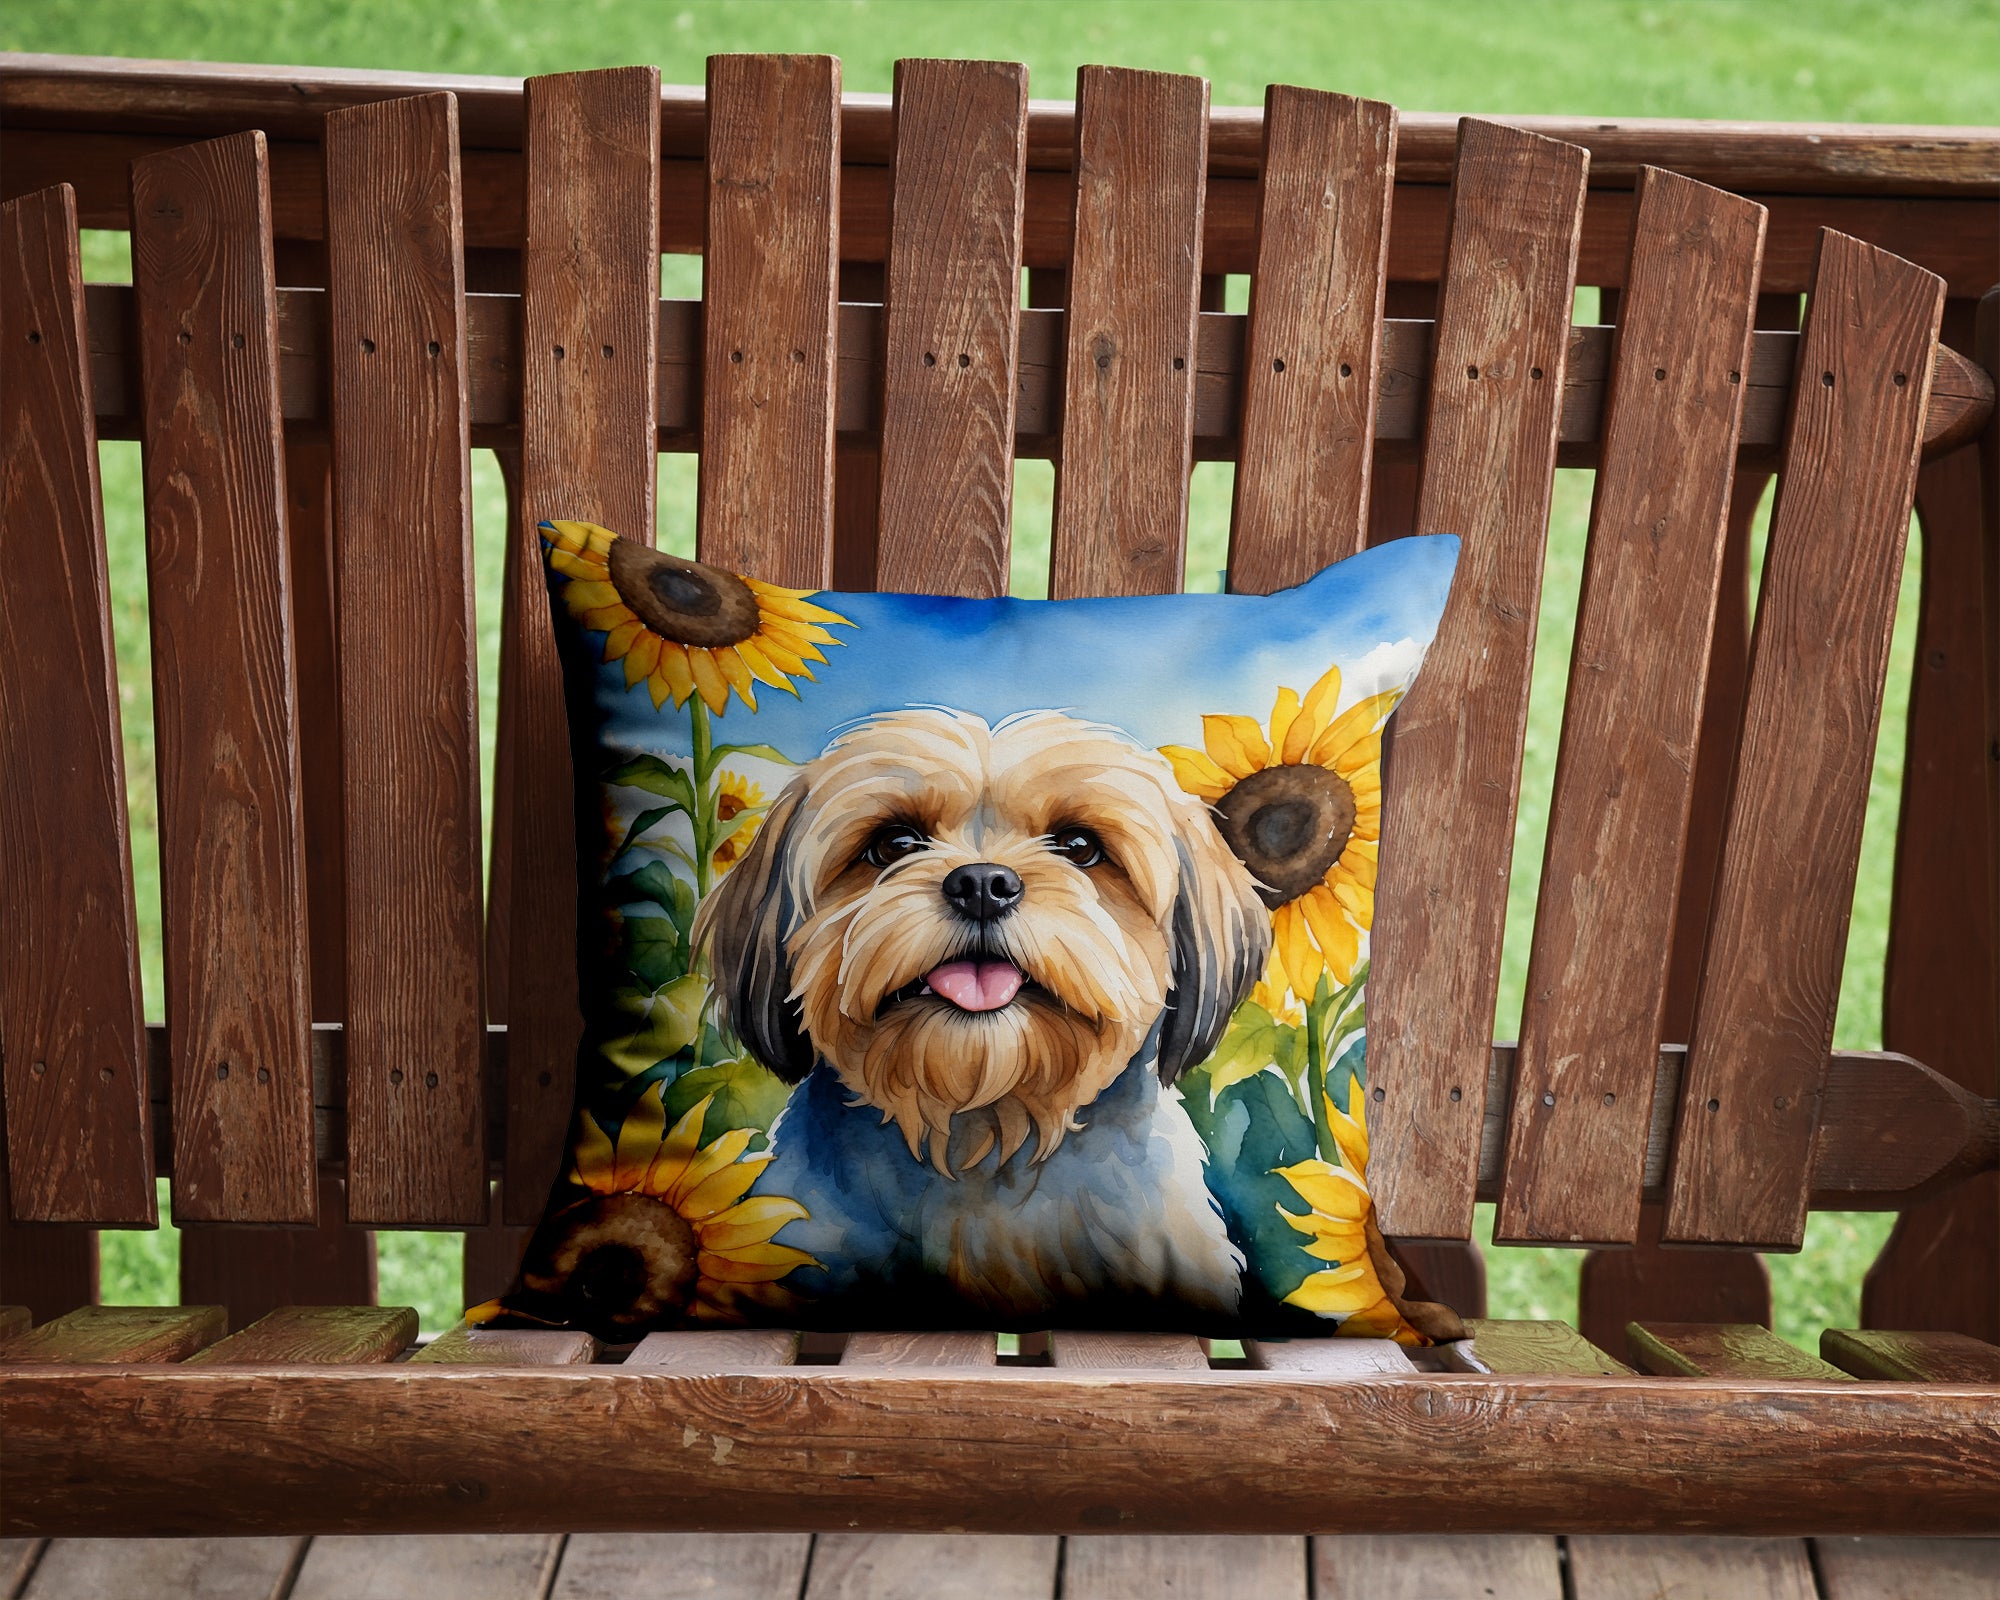 Buy this Lhasa Apso in Sunflowers Throw Pillow